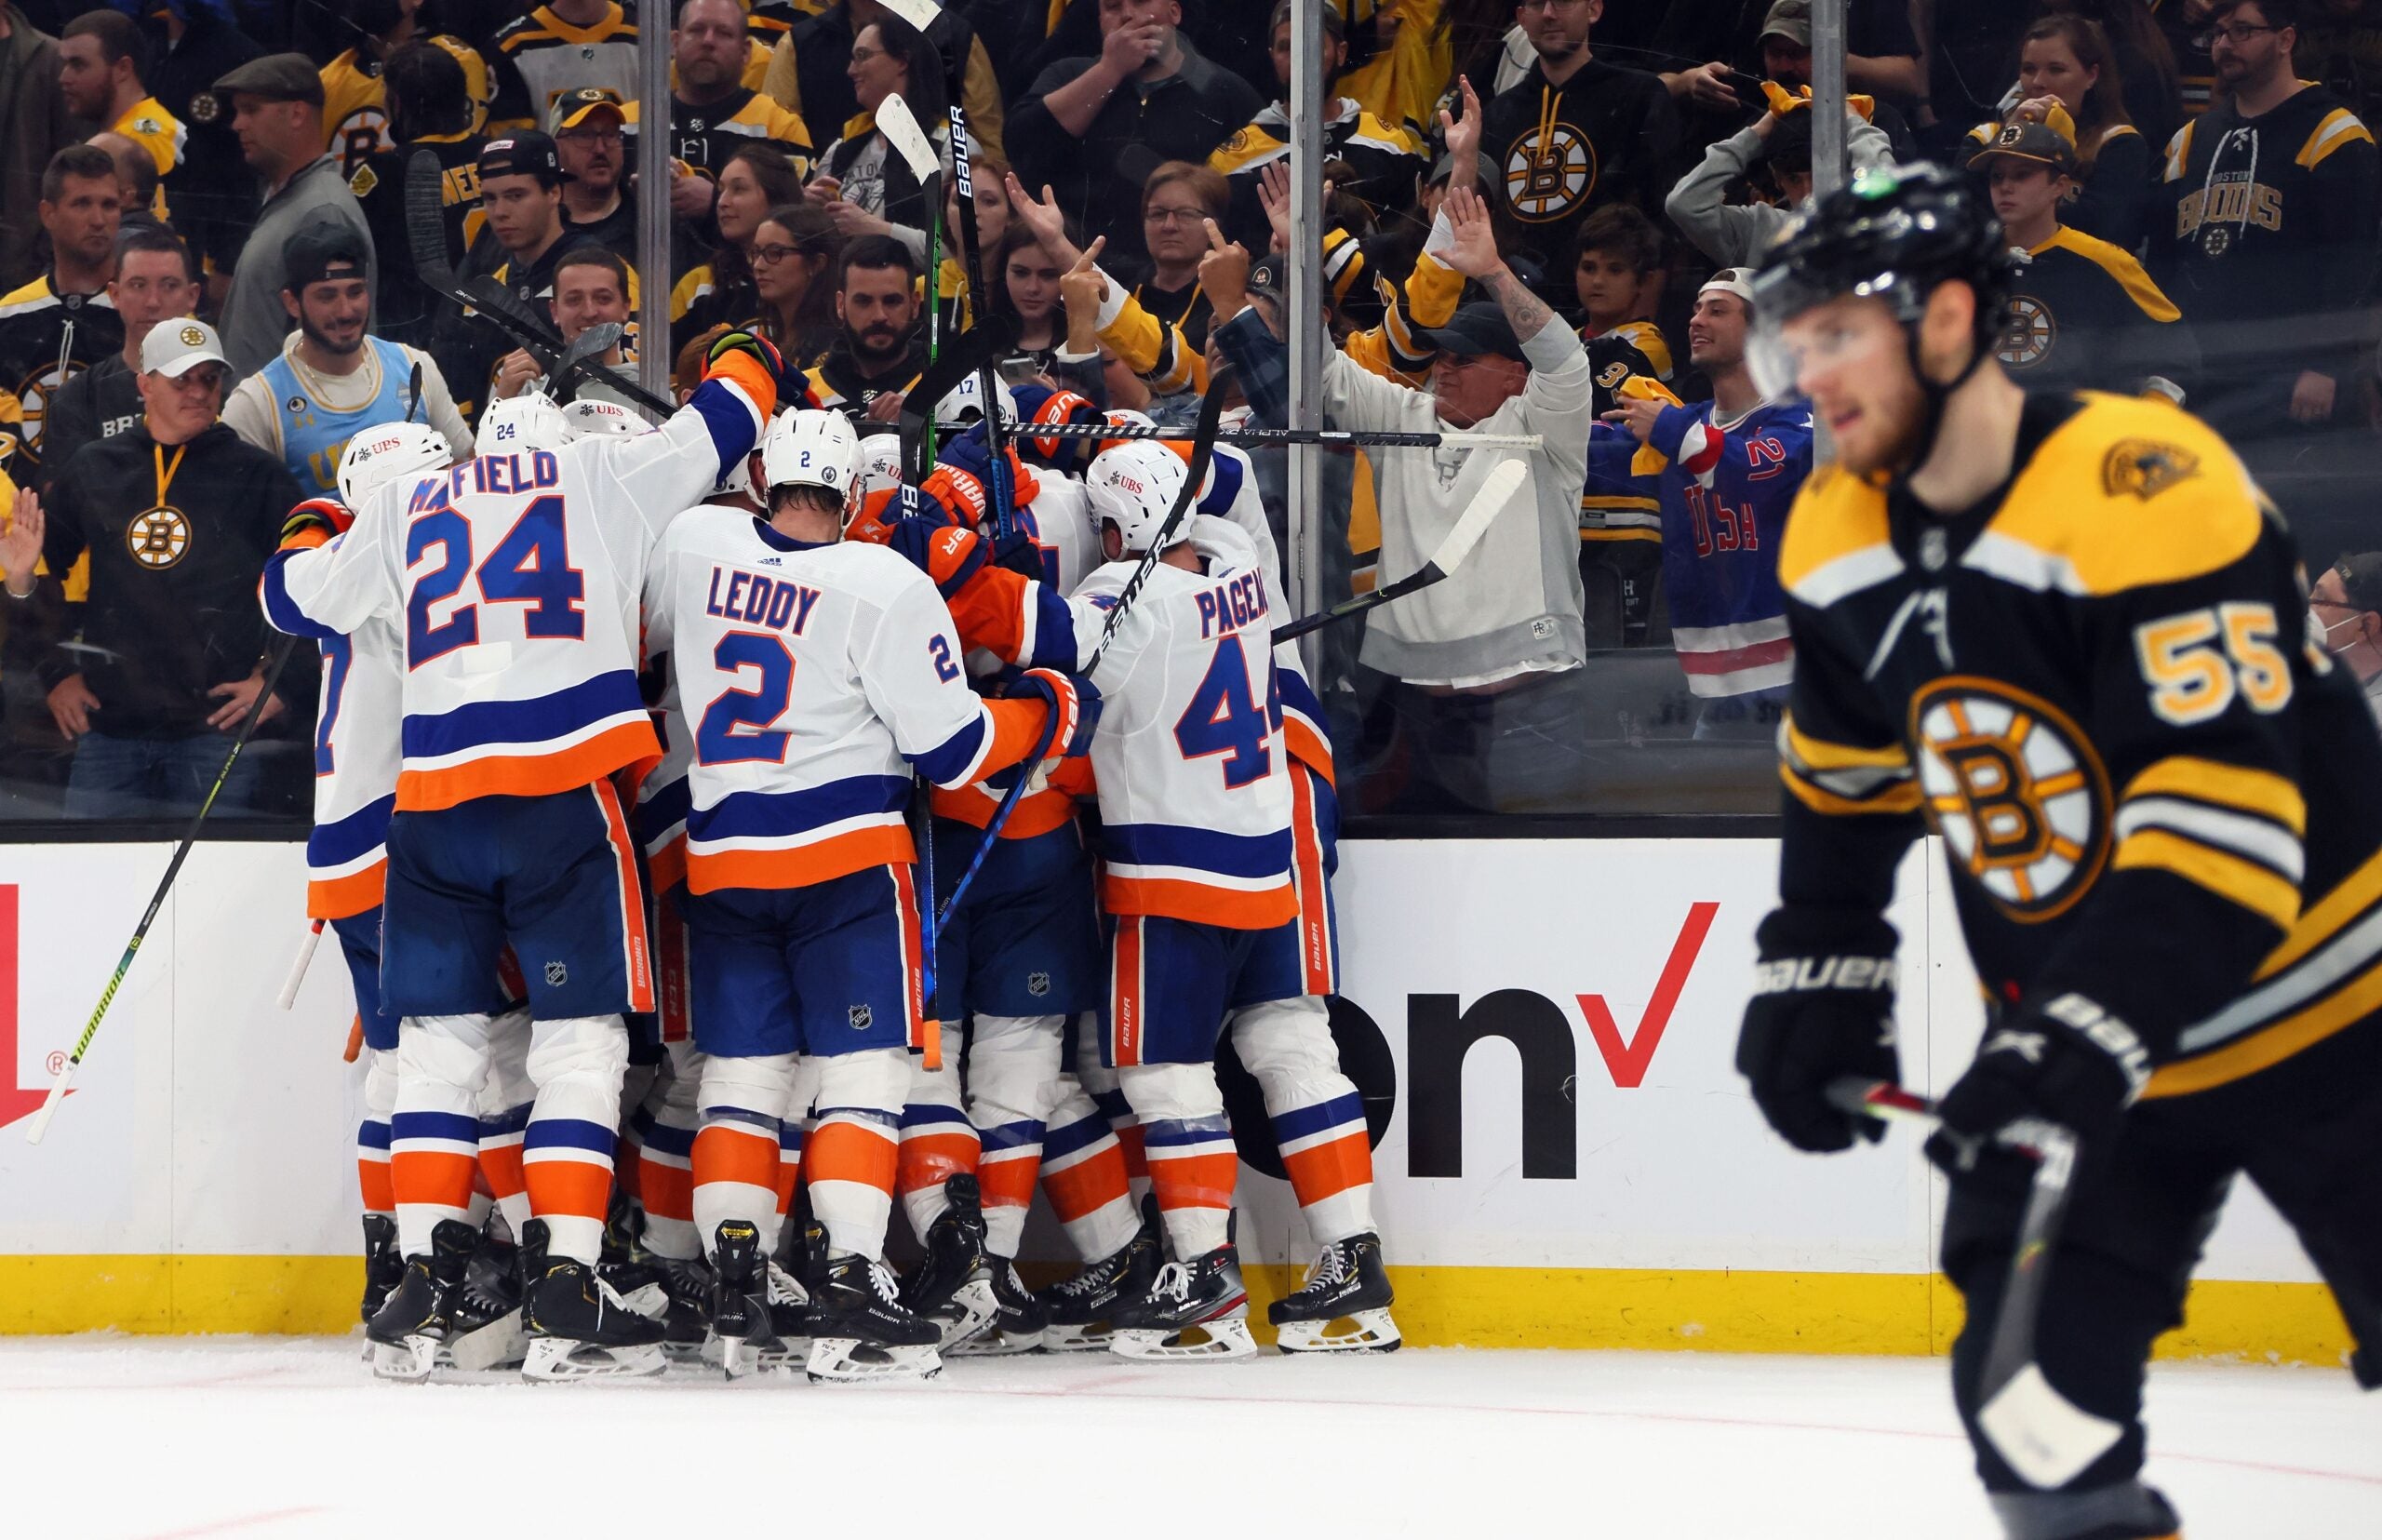 3 takeaways following the Bruins' Game 2 loss to the Islanders